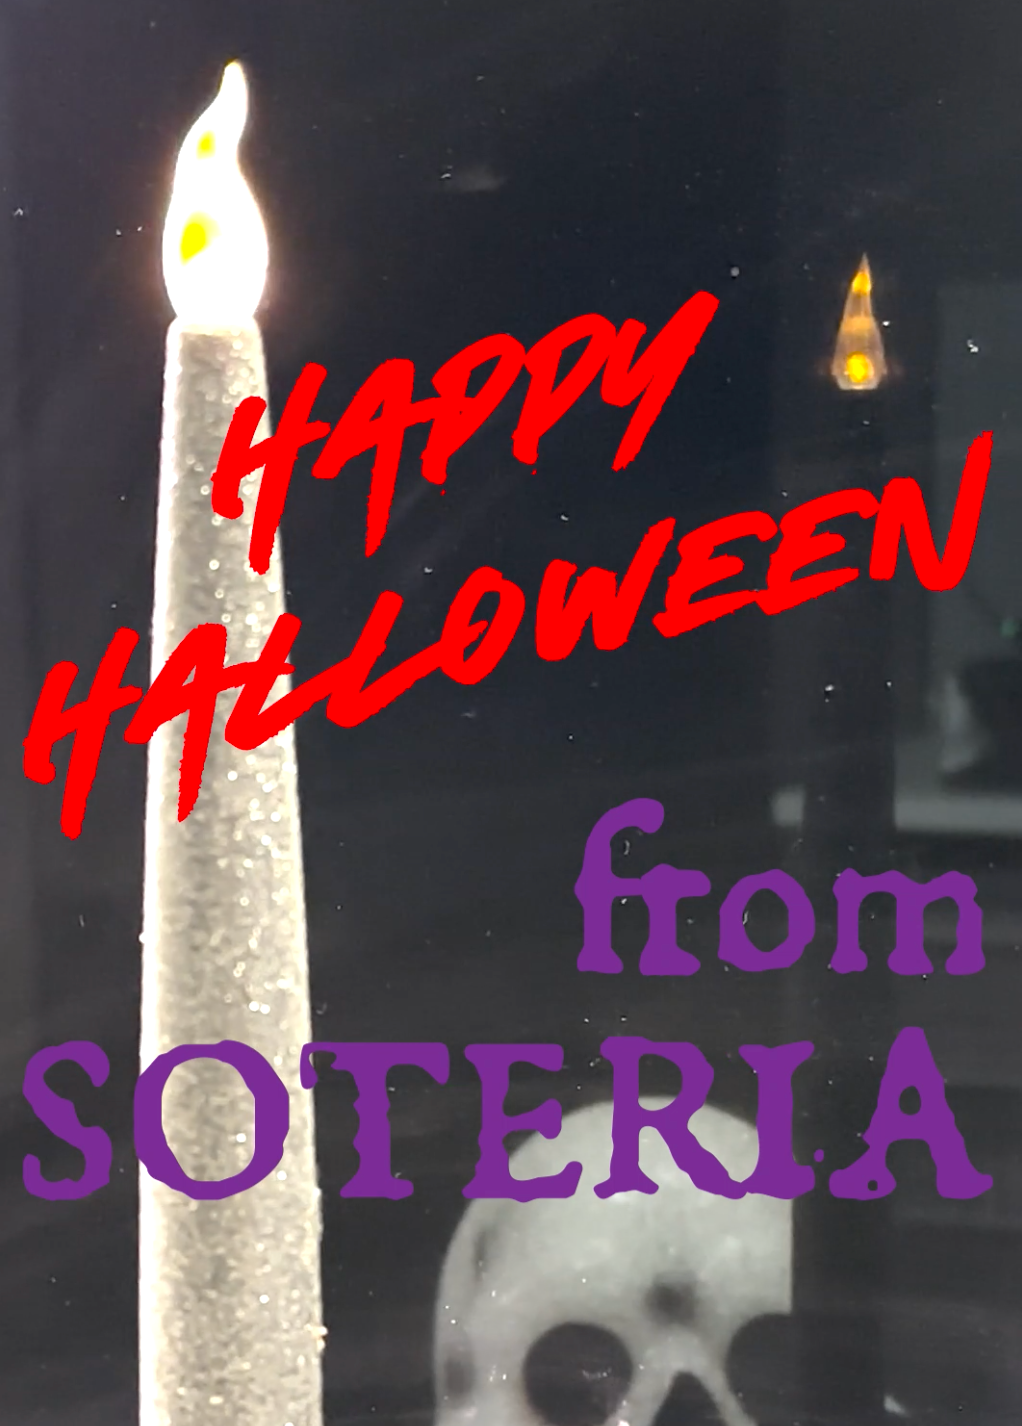 A candle and skull are reflected in a black mirror, text: Happy Halloween from Soteria